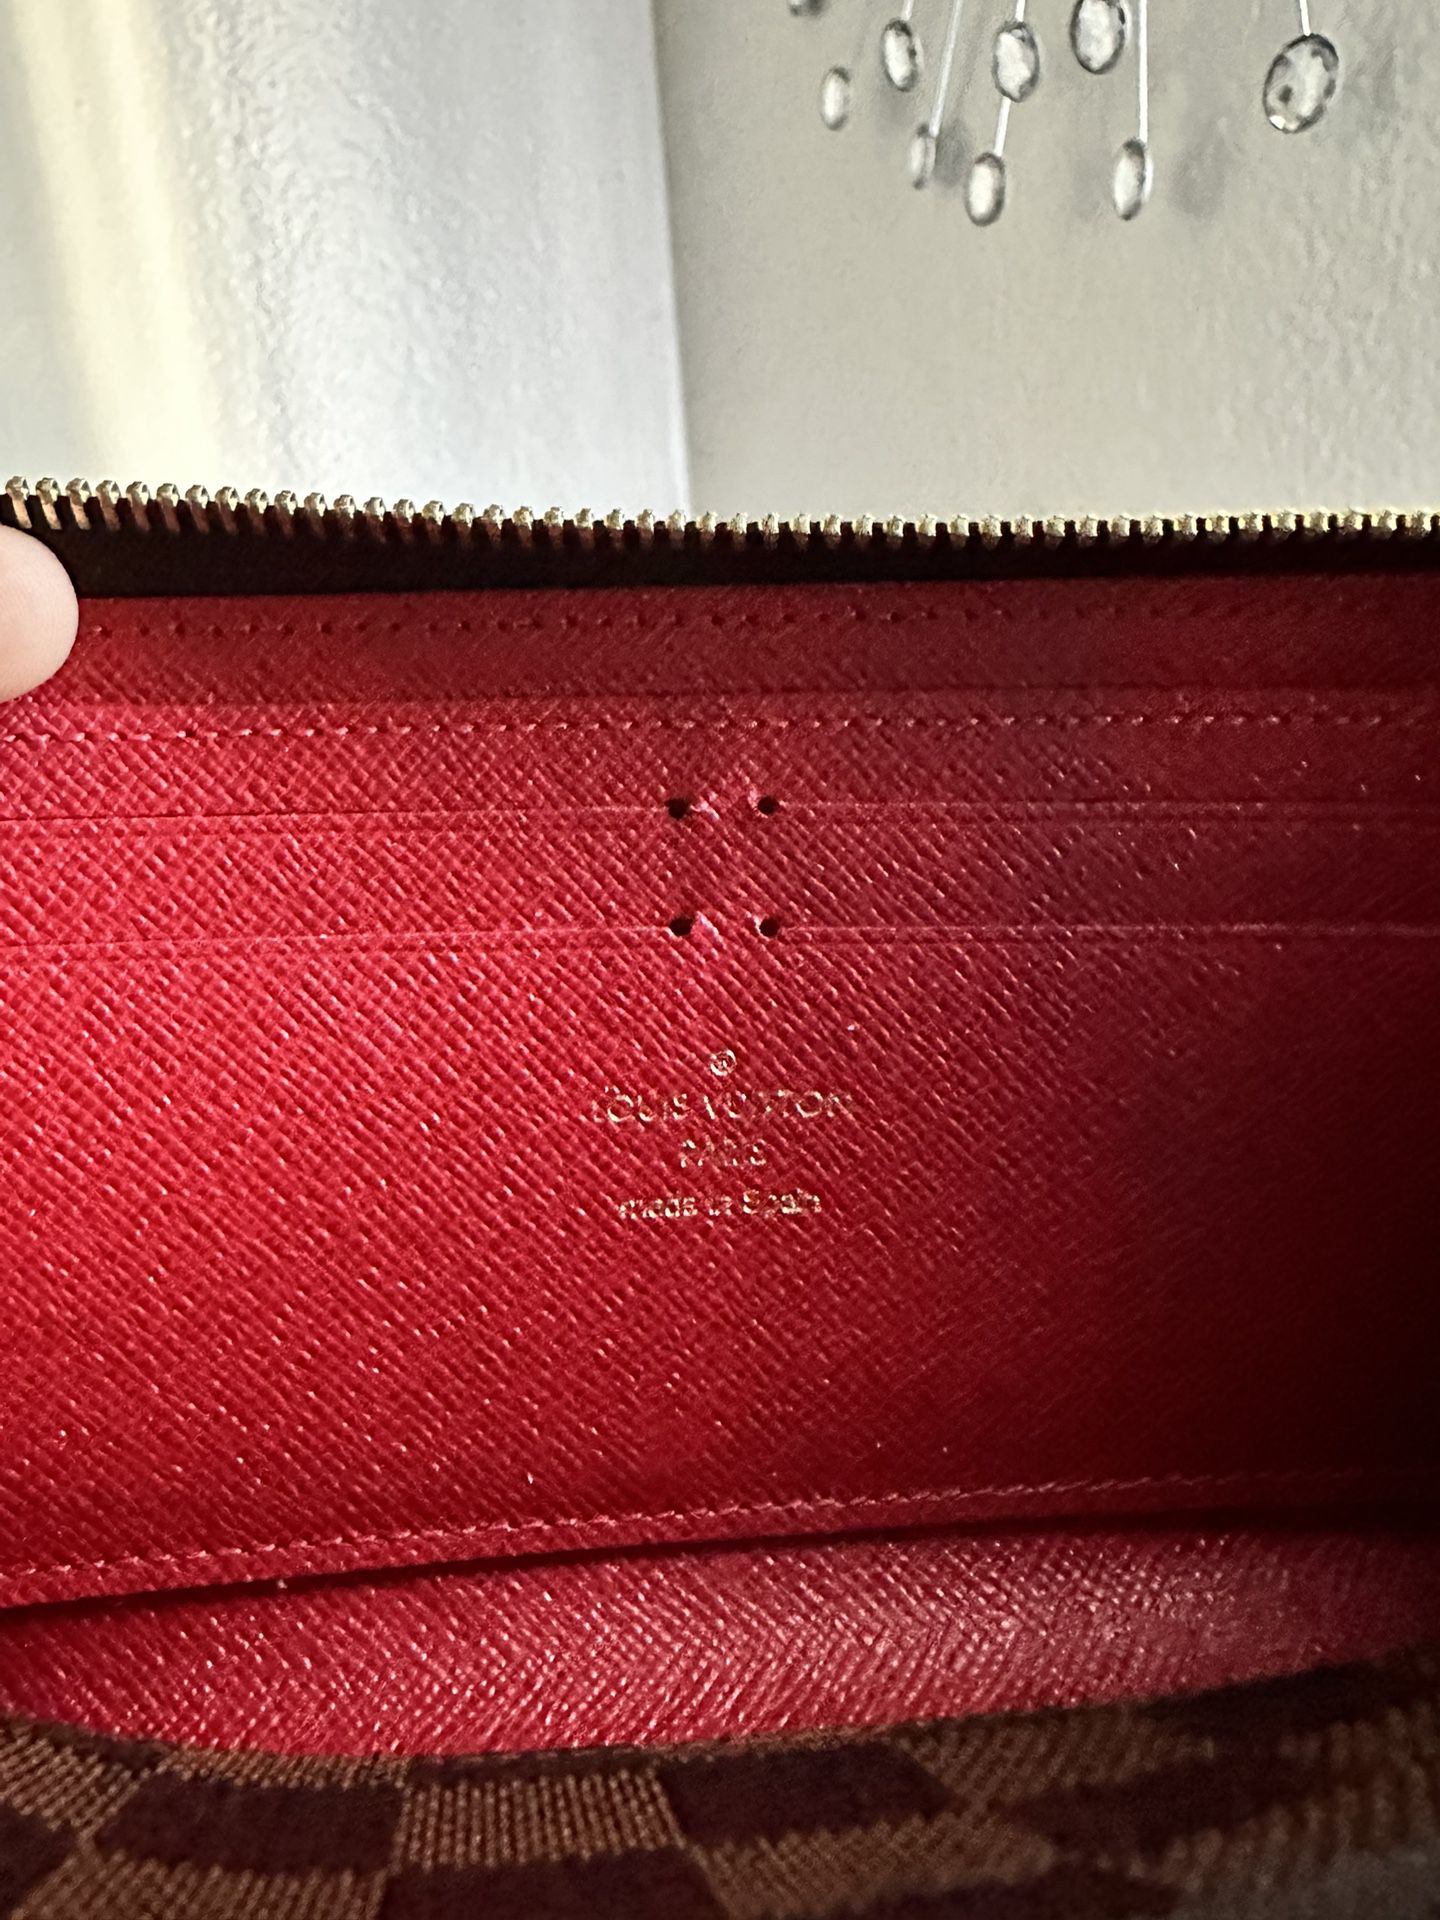 Louis Vuitton Clemence Wallet for Sale in Chino Hills, CA - OfferUp